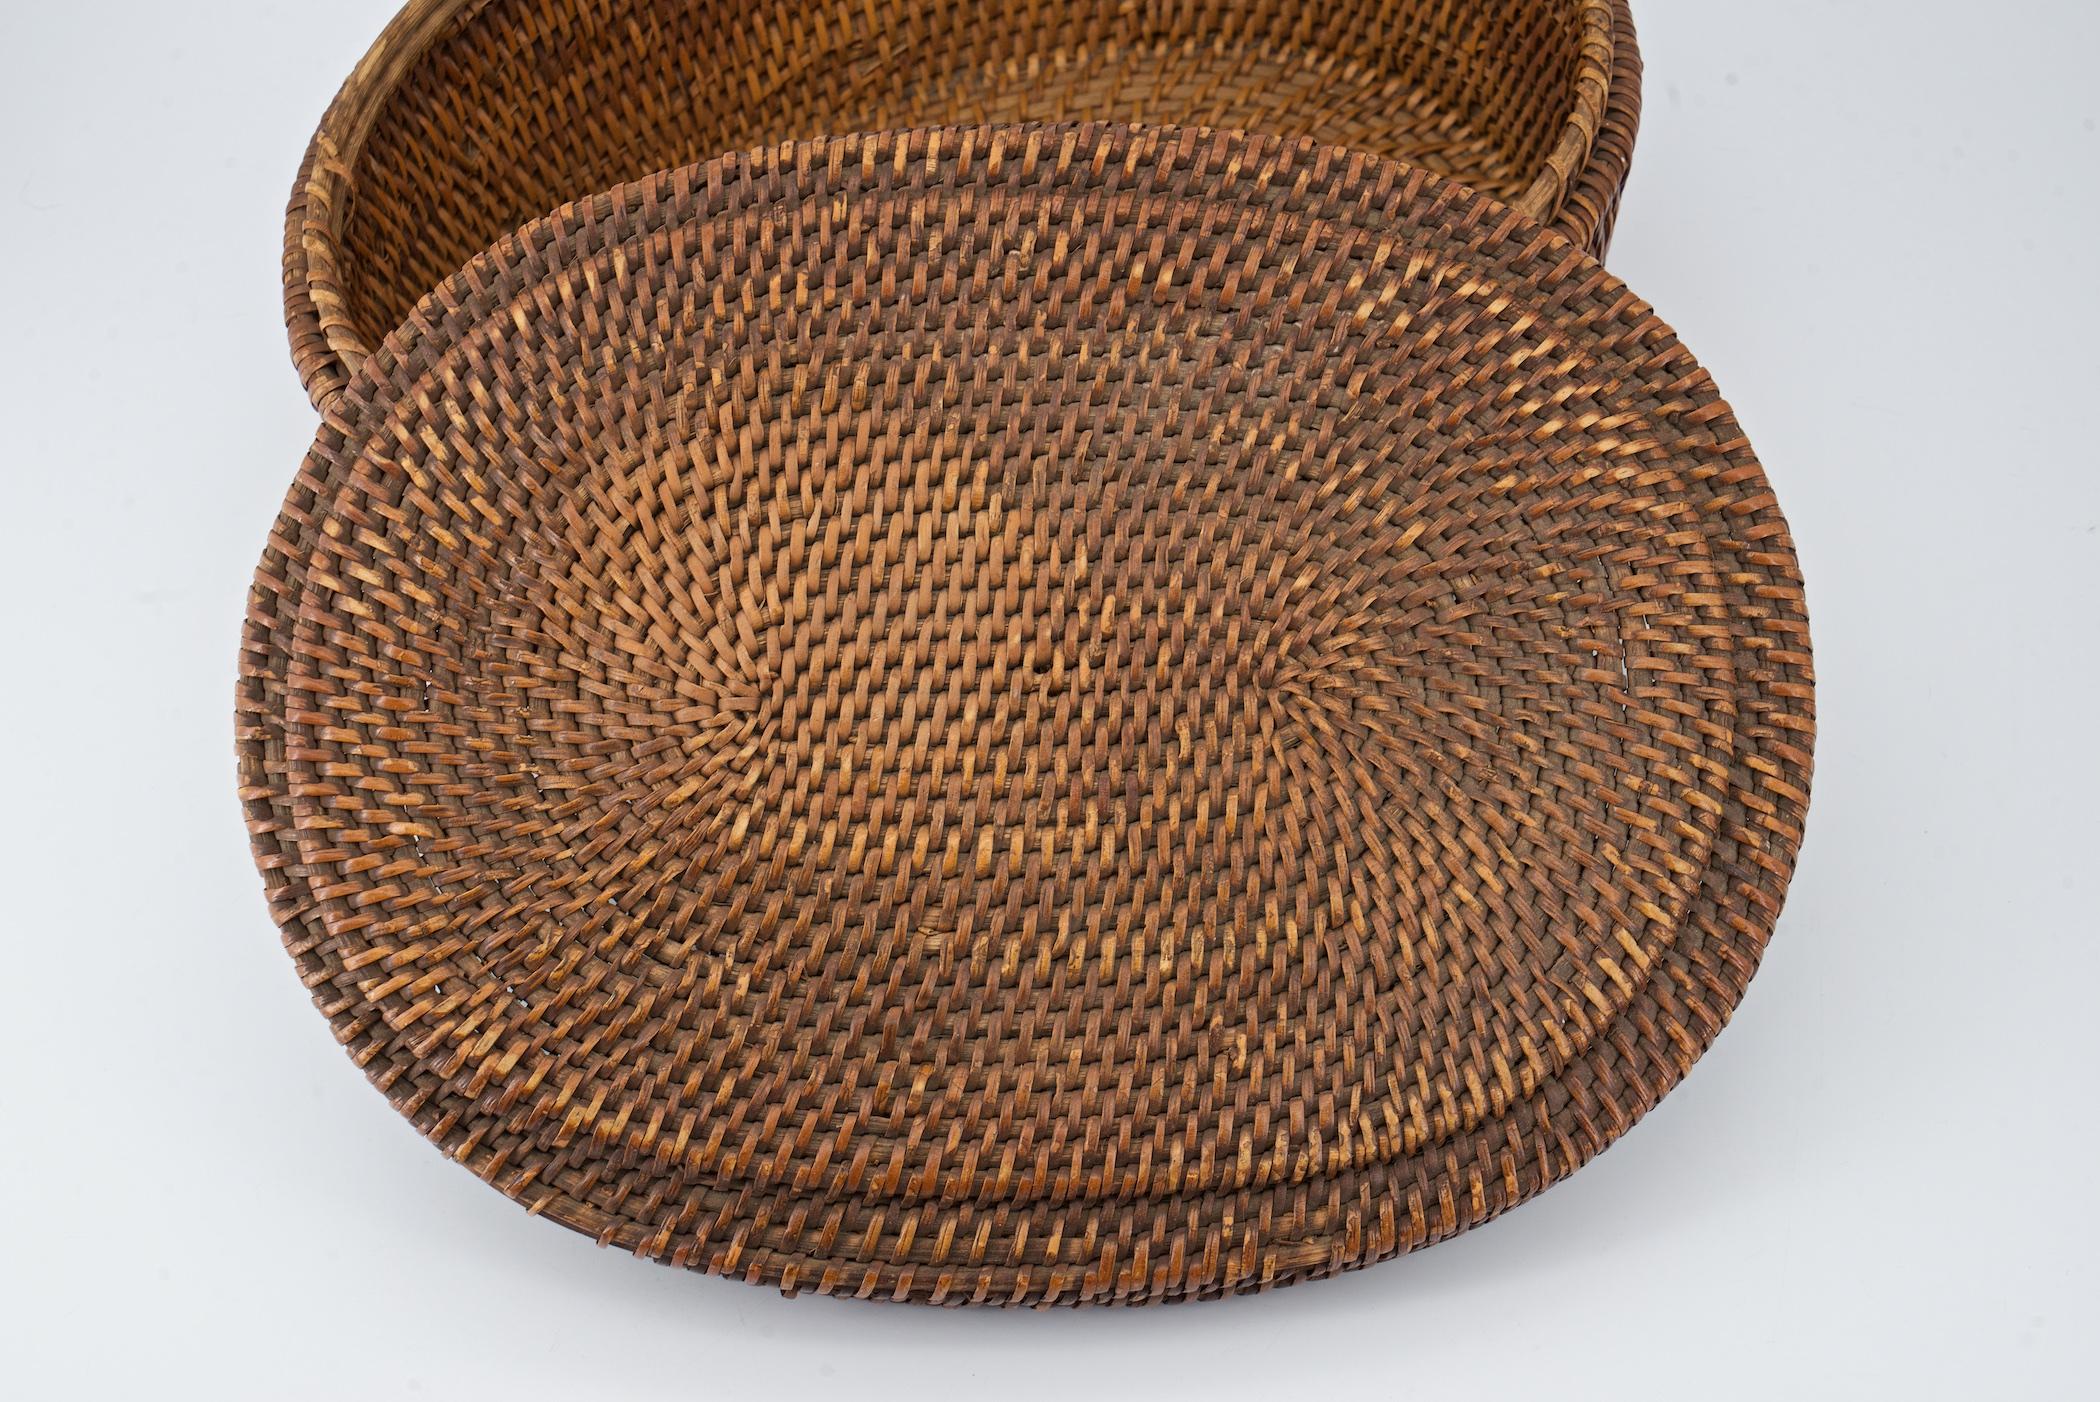 Native American Indian Woven Coiled Lidded Oval Basket 1